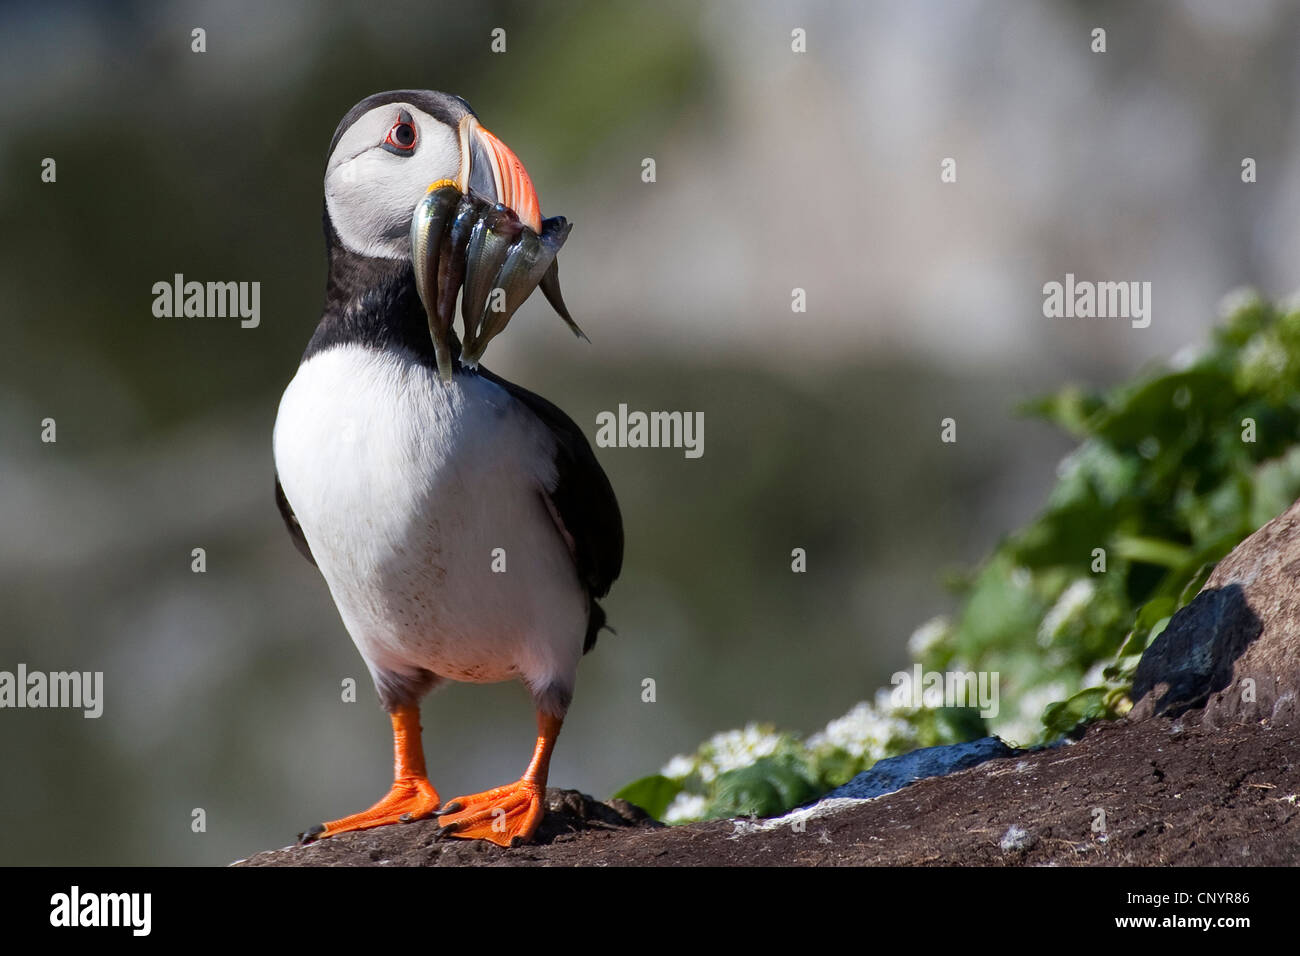 Atlantic puffin, Common puffin (Fratercula arctica), with several caught fishes in its beak Stock Photo